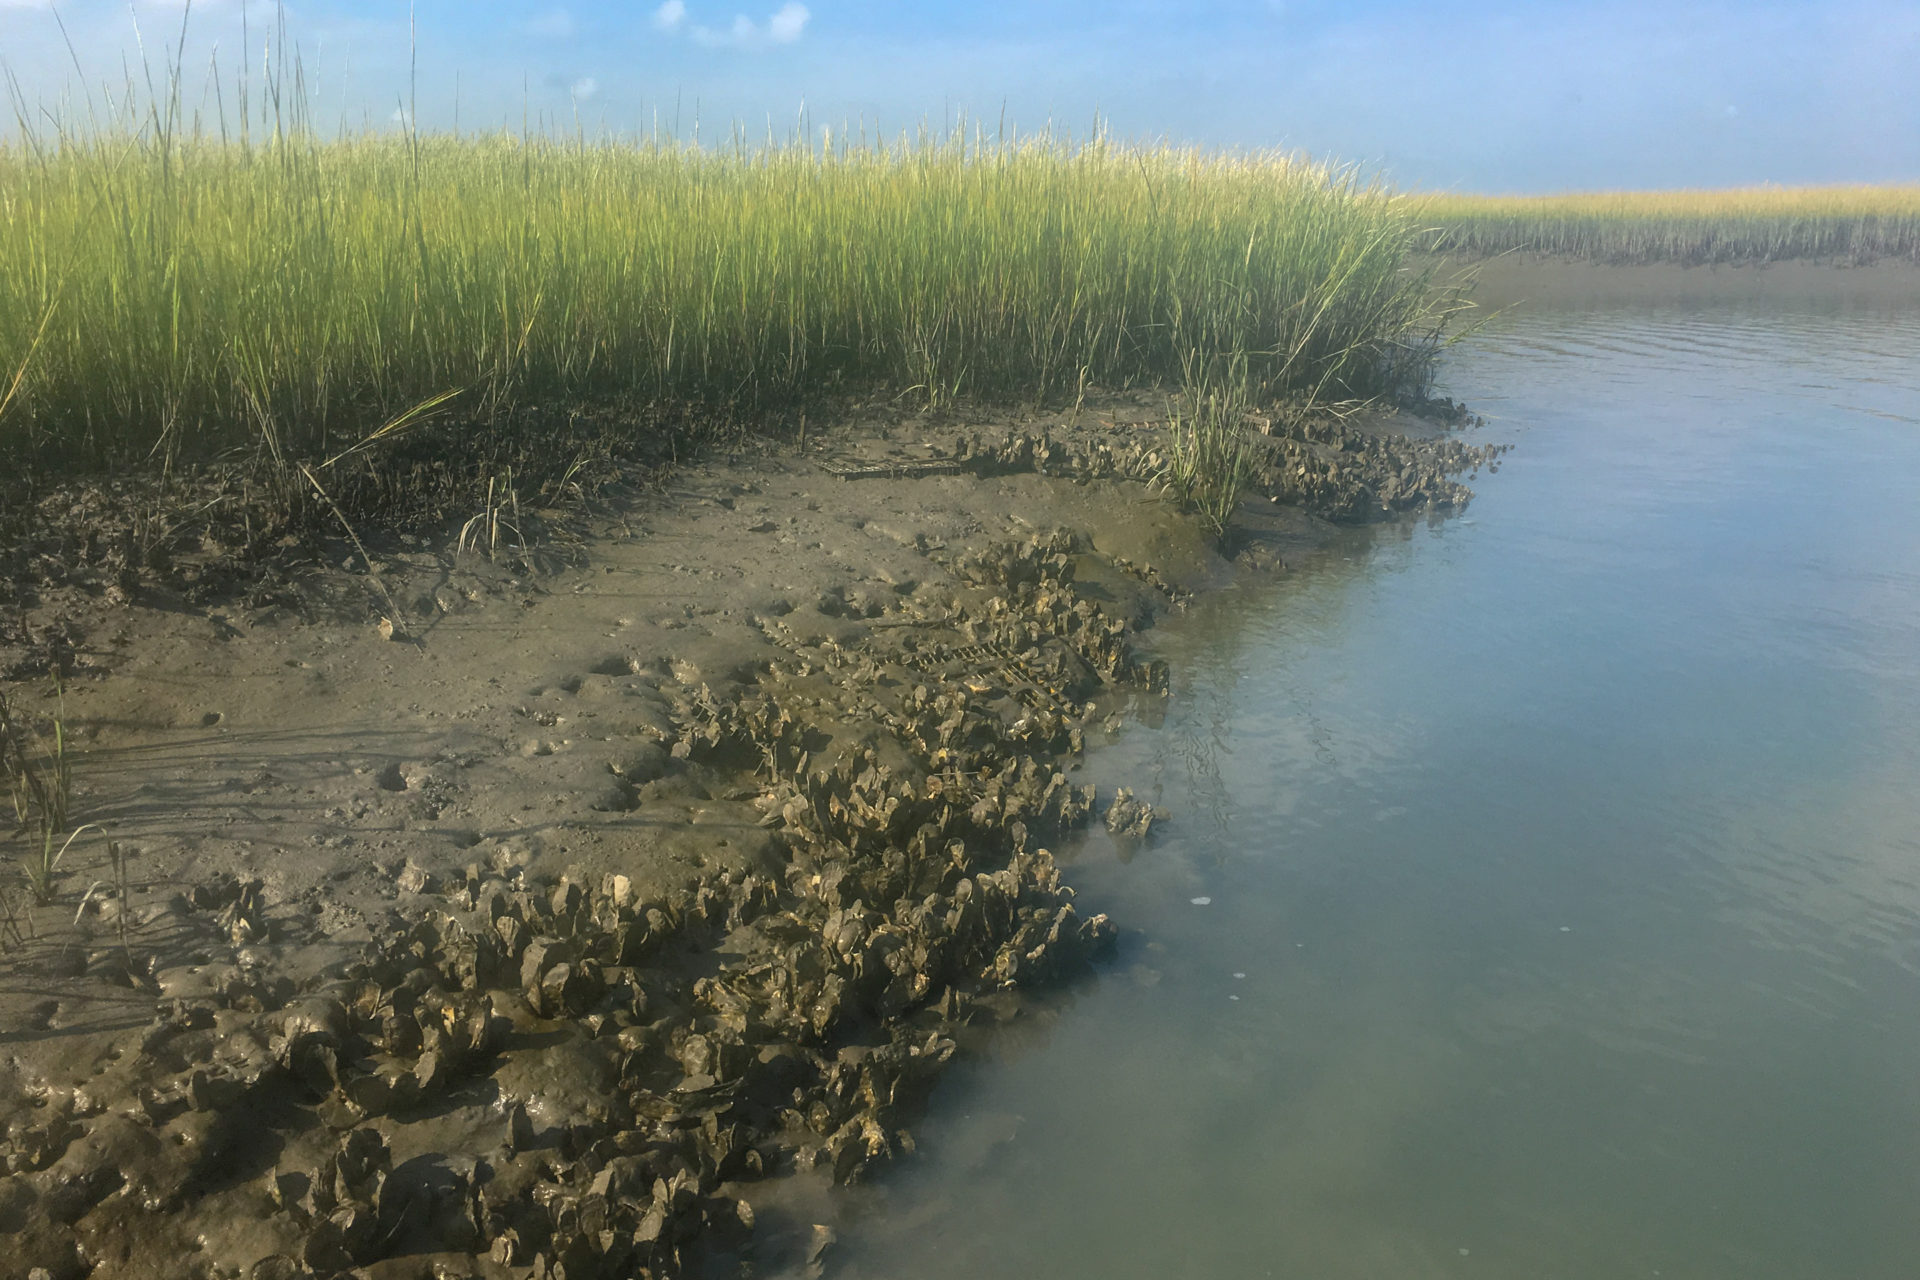 Wild oysters thrive in the muddy marshes on the Eastern Shore of Virginia.